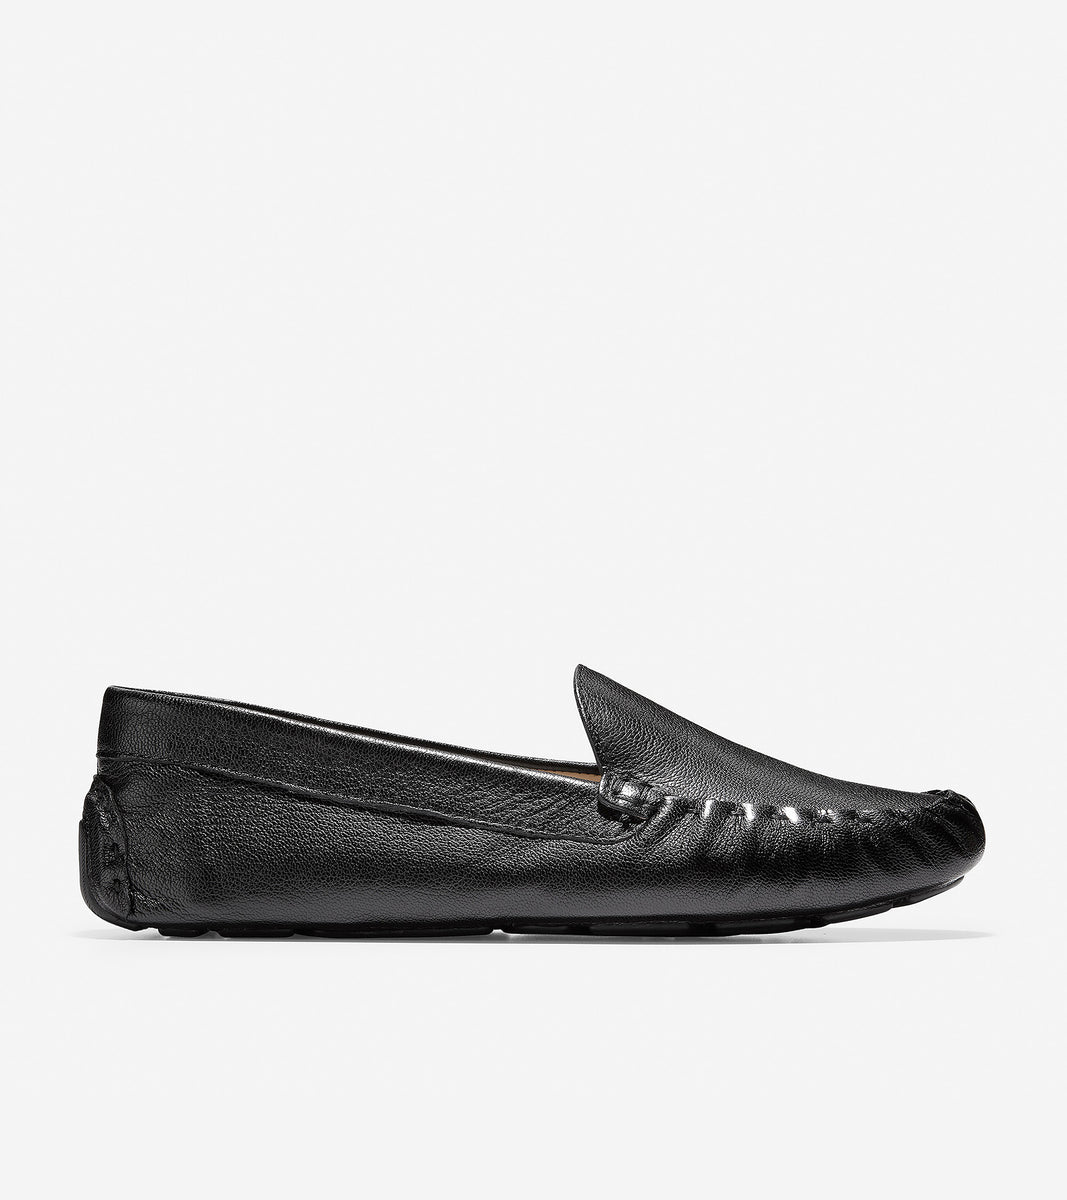 ColeHaan-Evelyn Driver-w13570-Black Leather